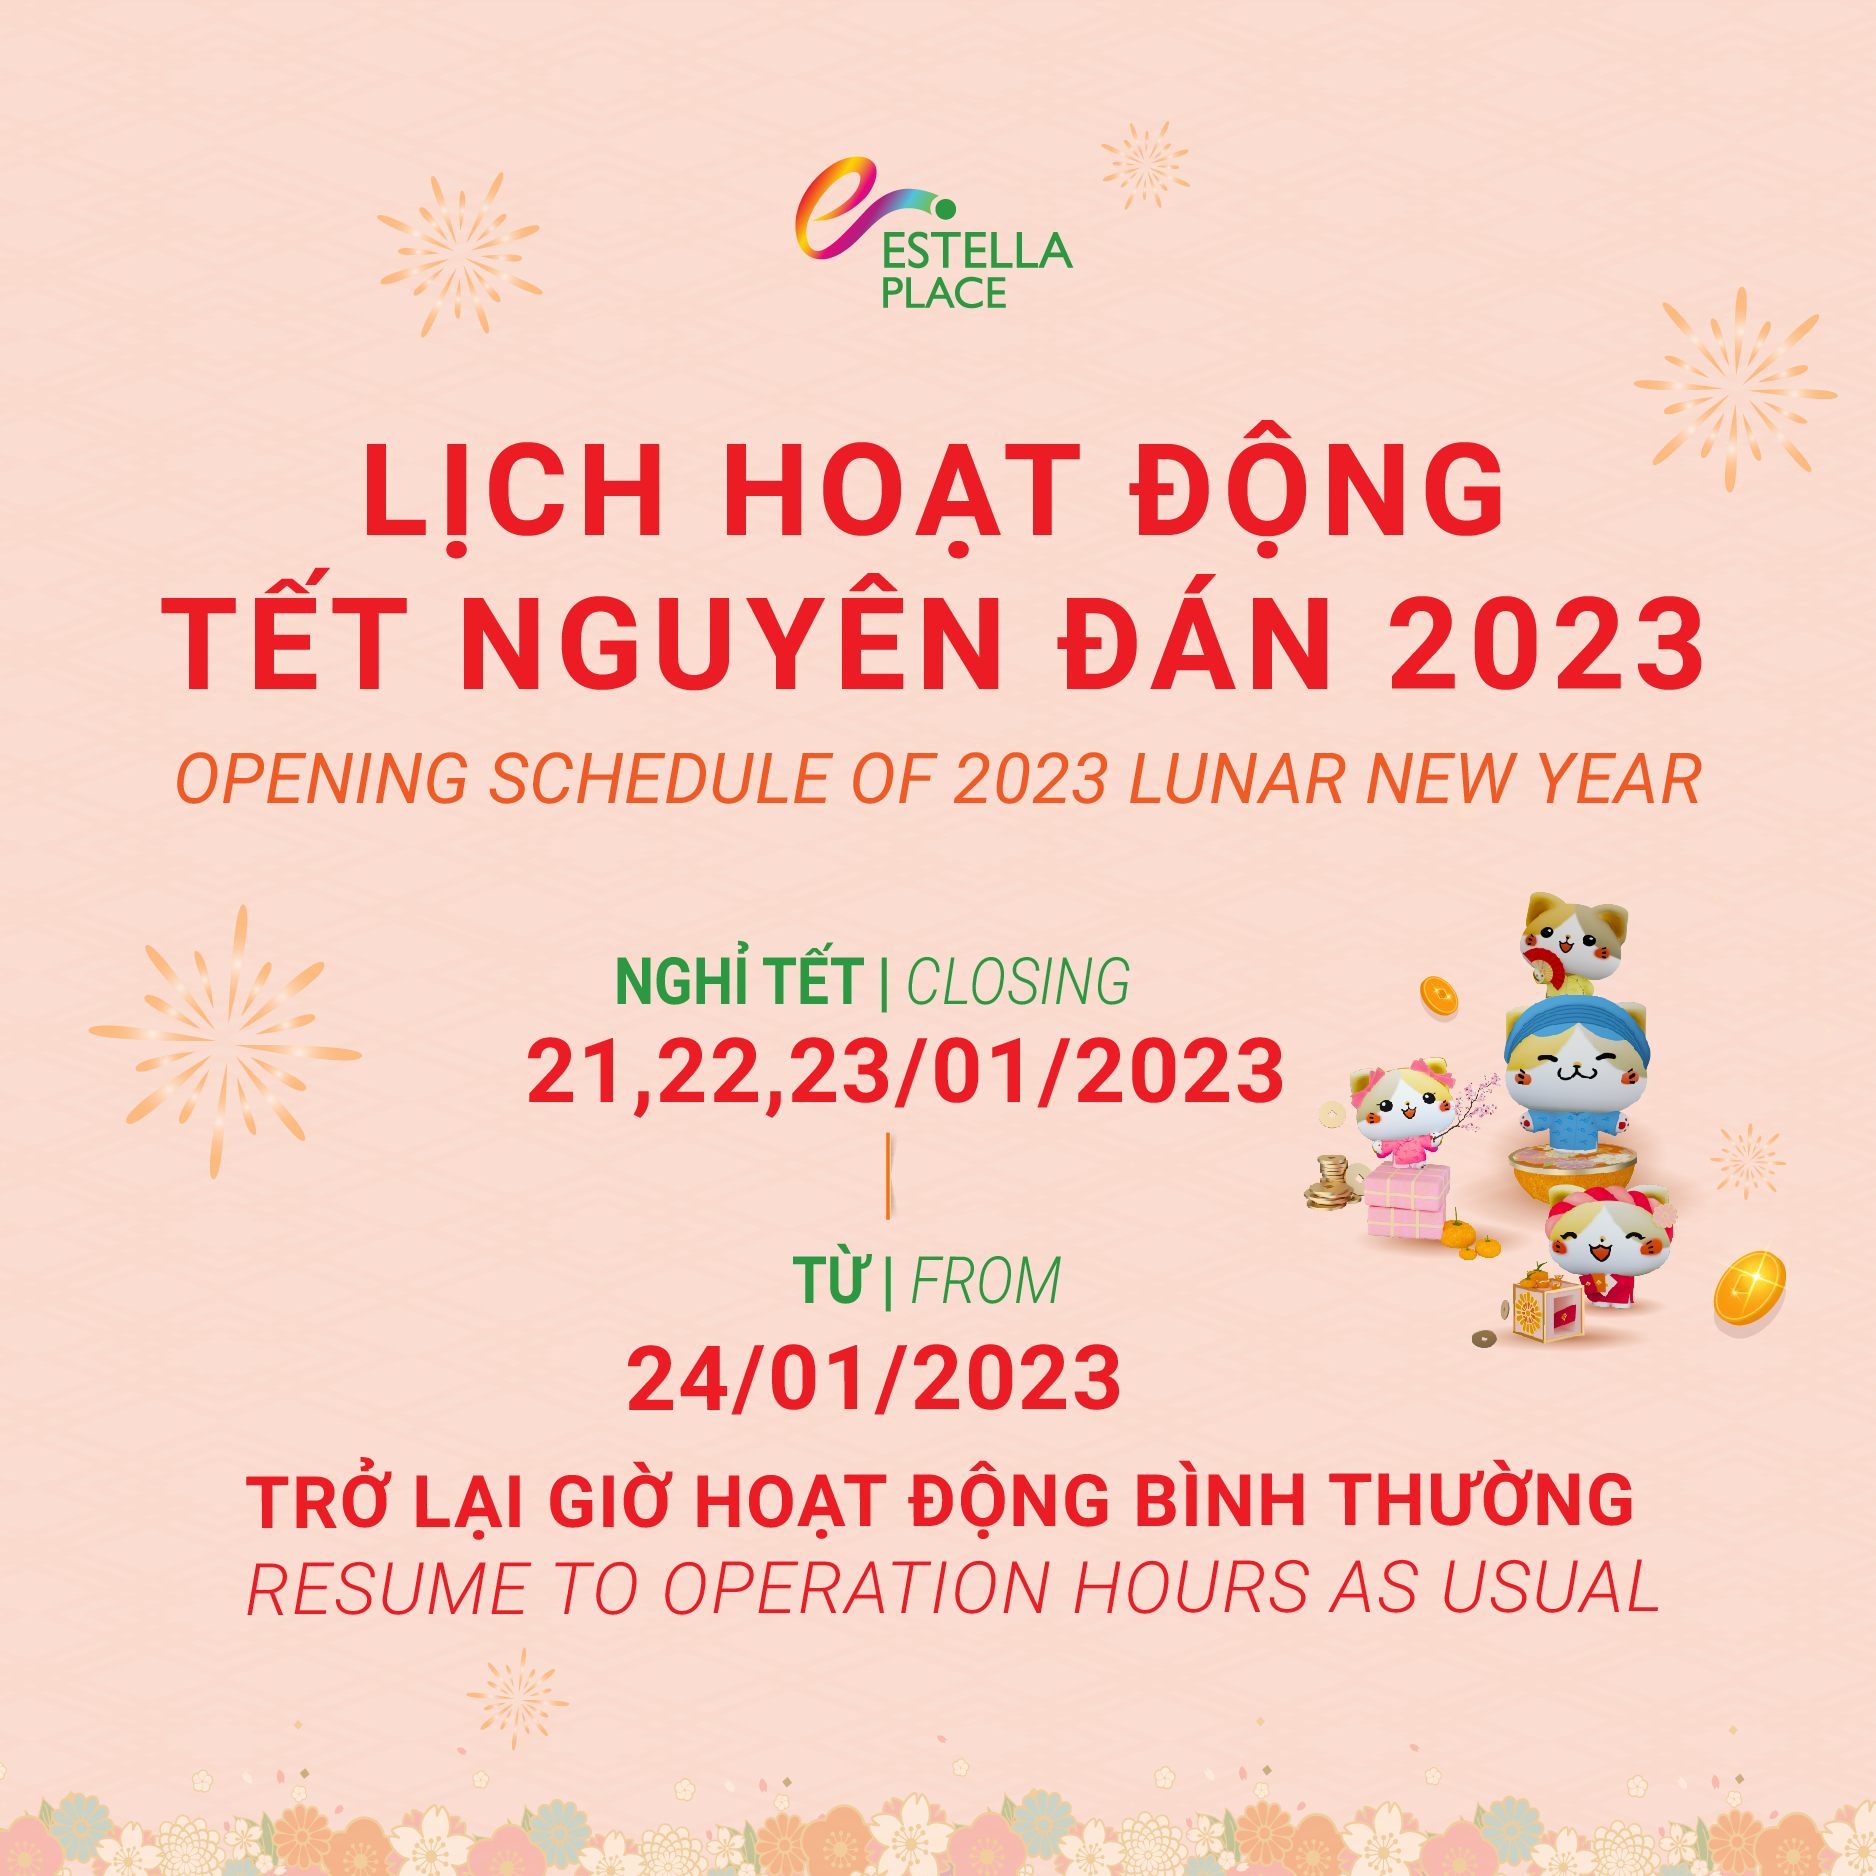 📣OPENING SCHEDULE OF 2023 LUNAR NEW YEAR